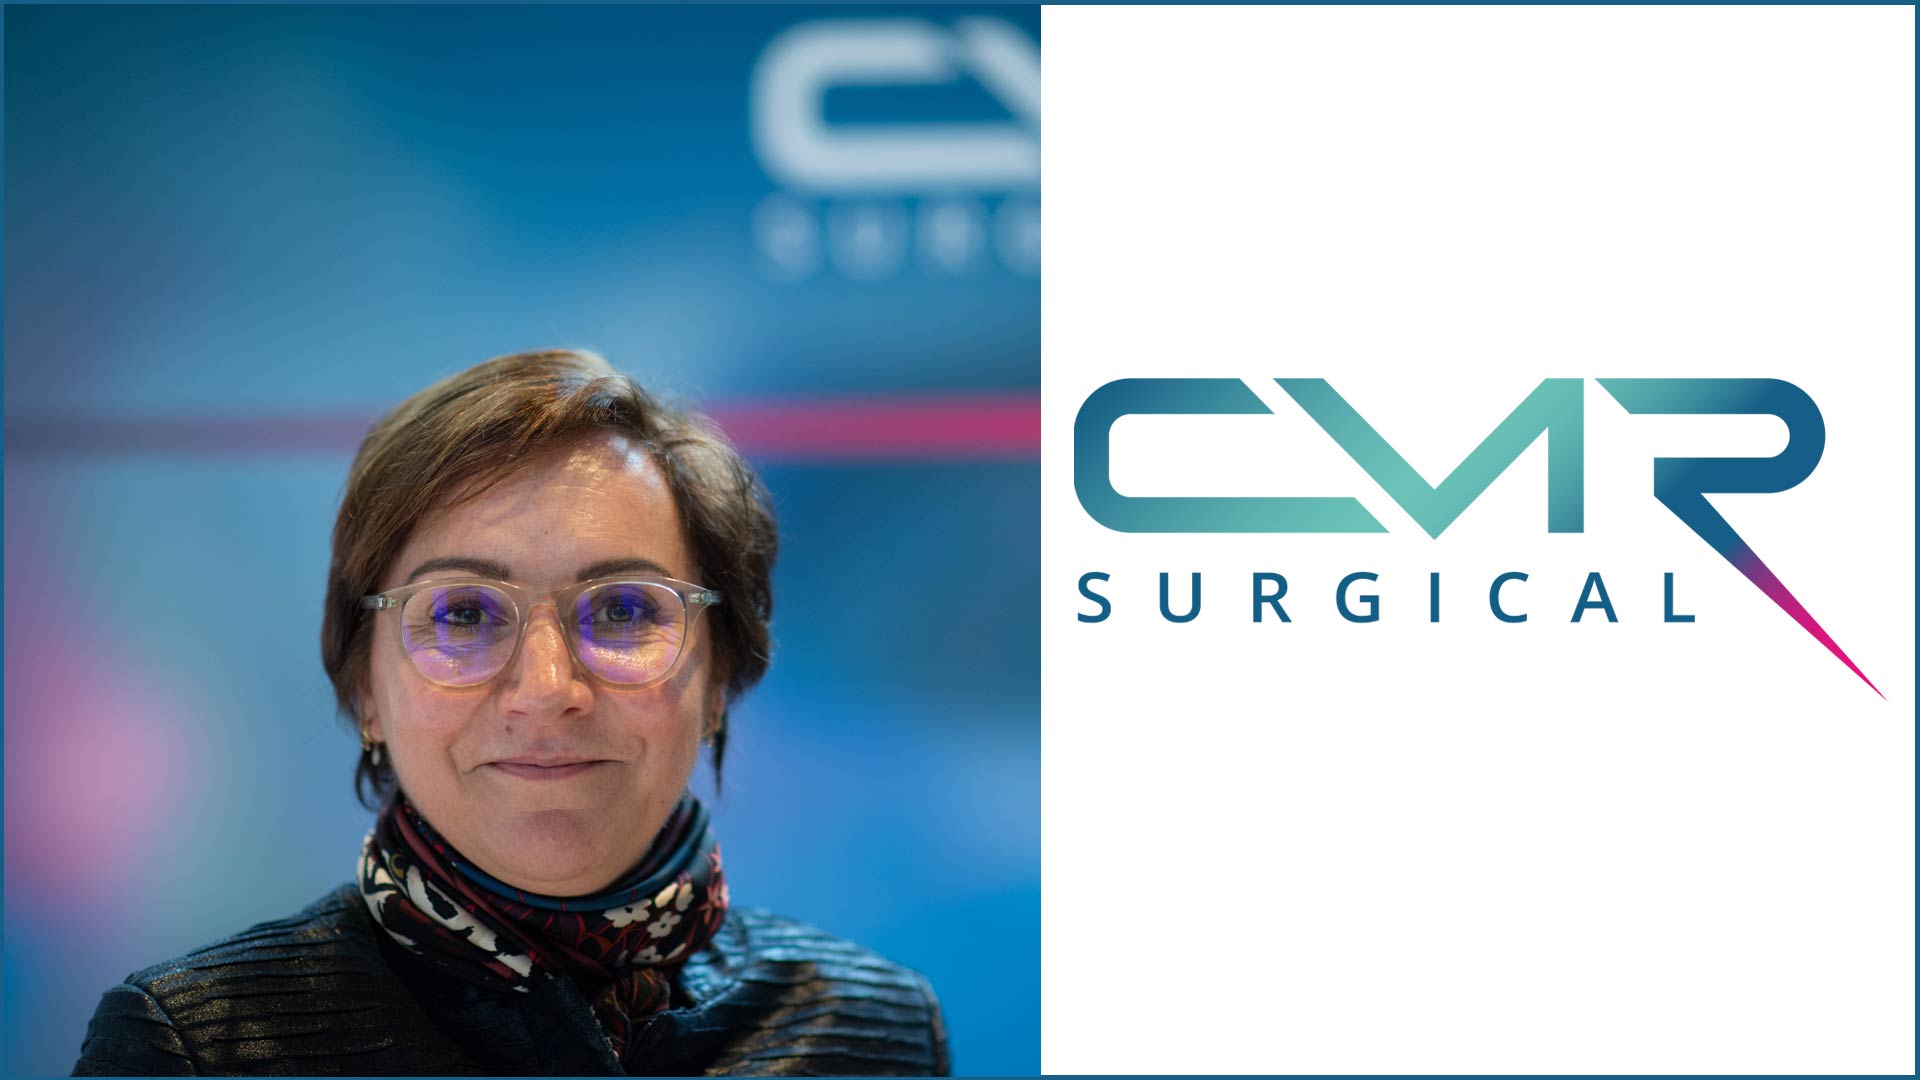 CMR Surgical, Revolutionaire Chirurgie